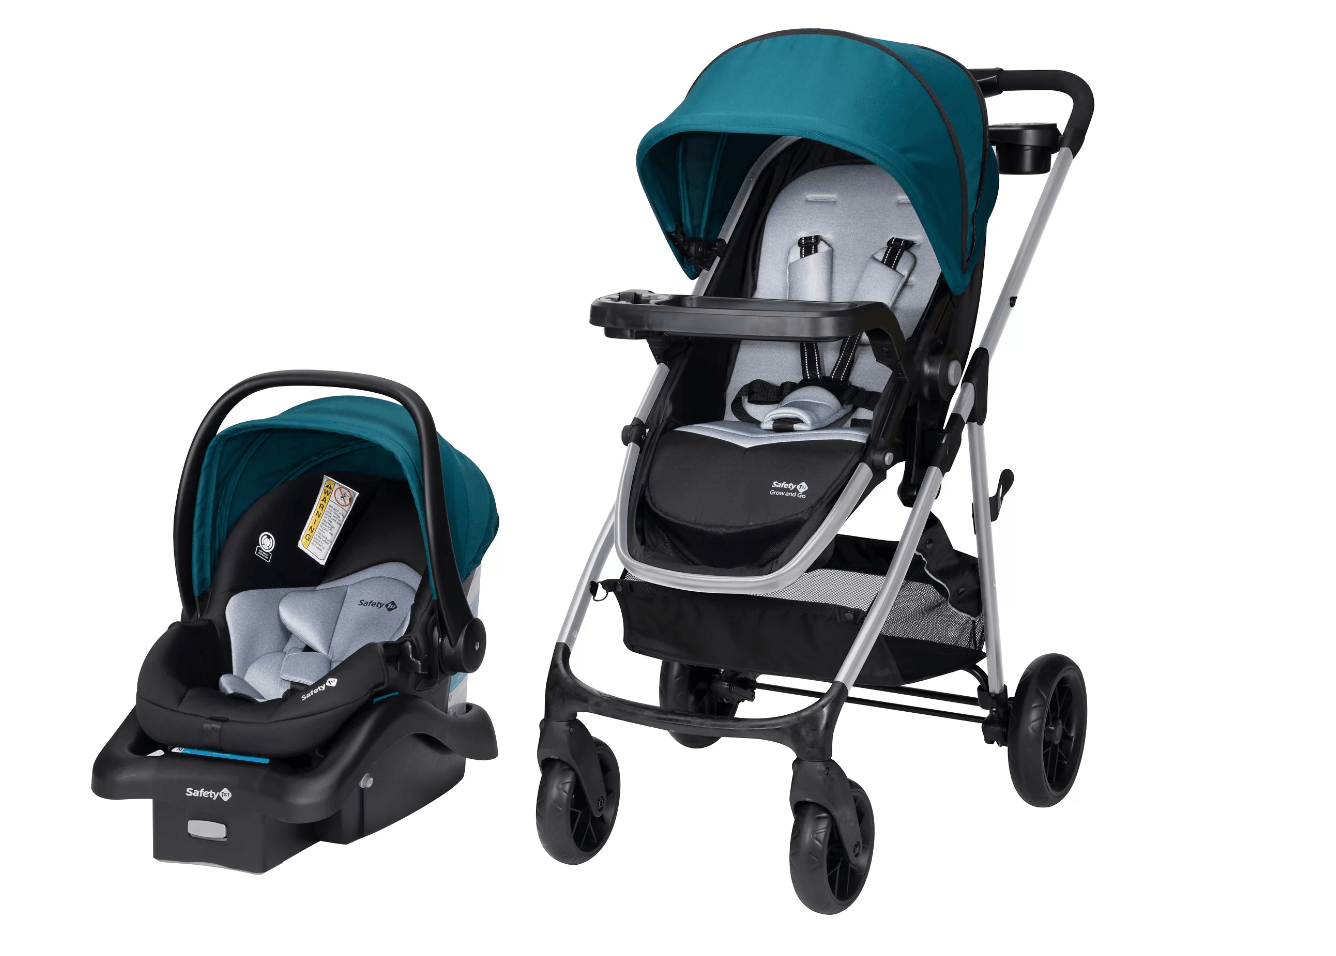 Flex 8-in-1 Travel System in Teal - The Baby's Room